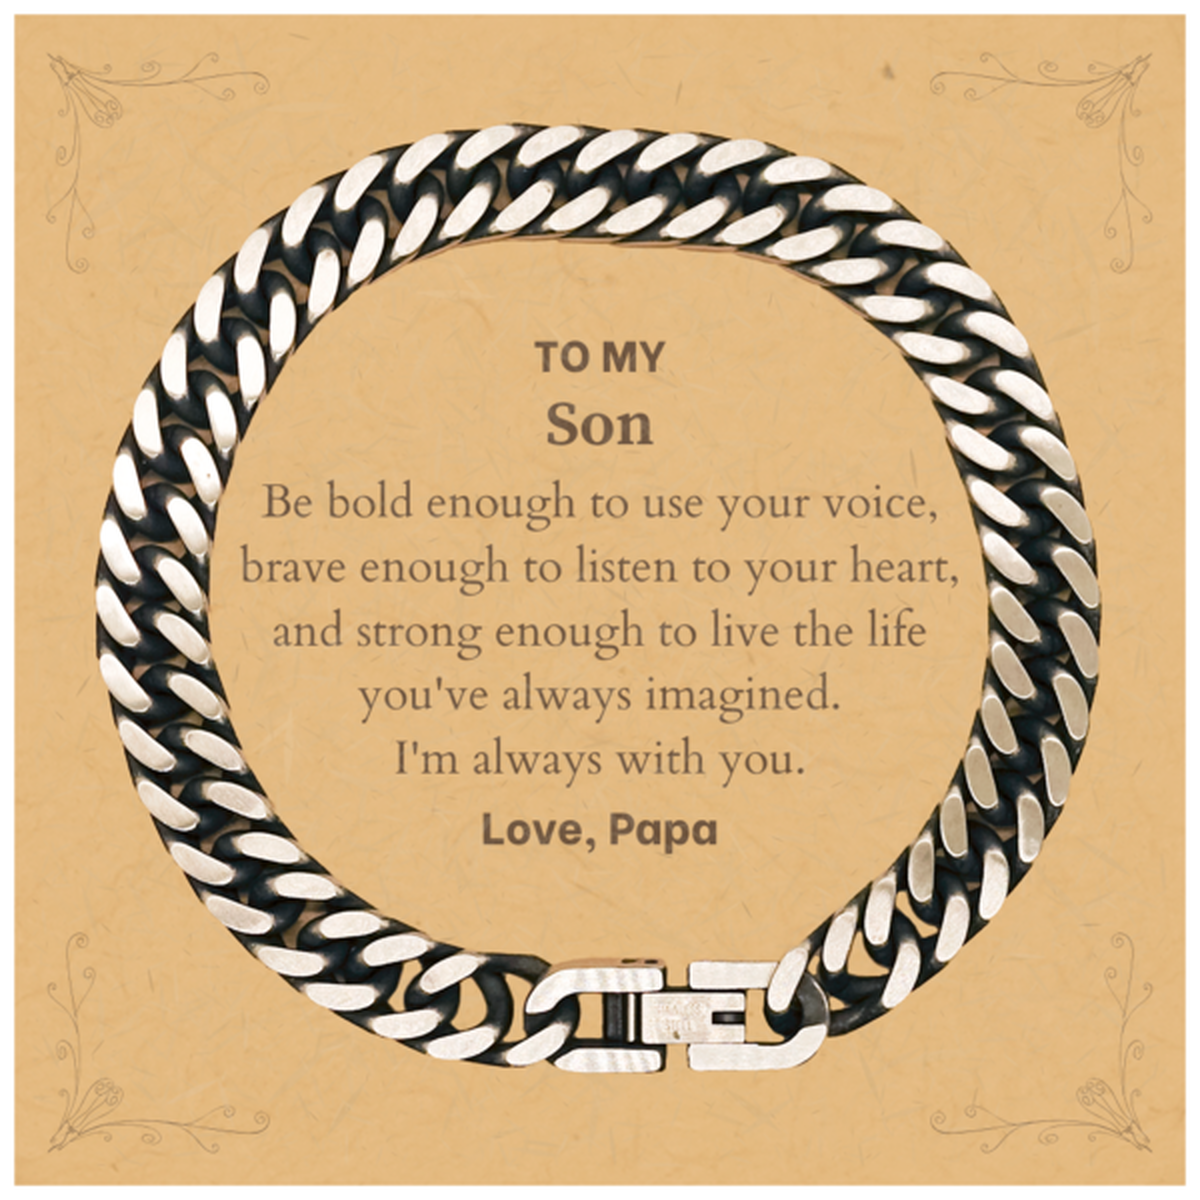 Keepsake Son Cuban Link Chain Bracelet Gift Idea Graduation Christmas Birthday Son from Papa, Son Be bold enough to use your voice, brave enough to listen to your heart. Love, Papa